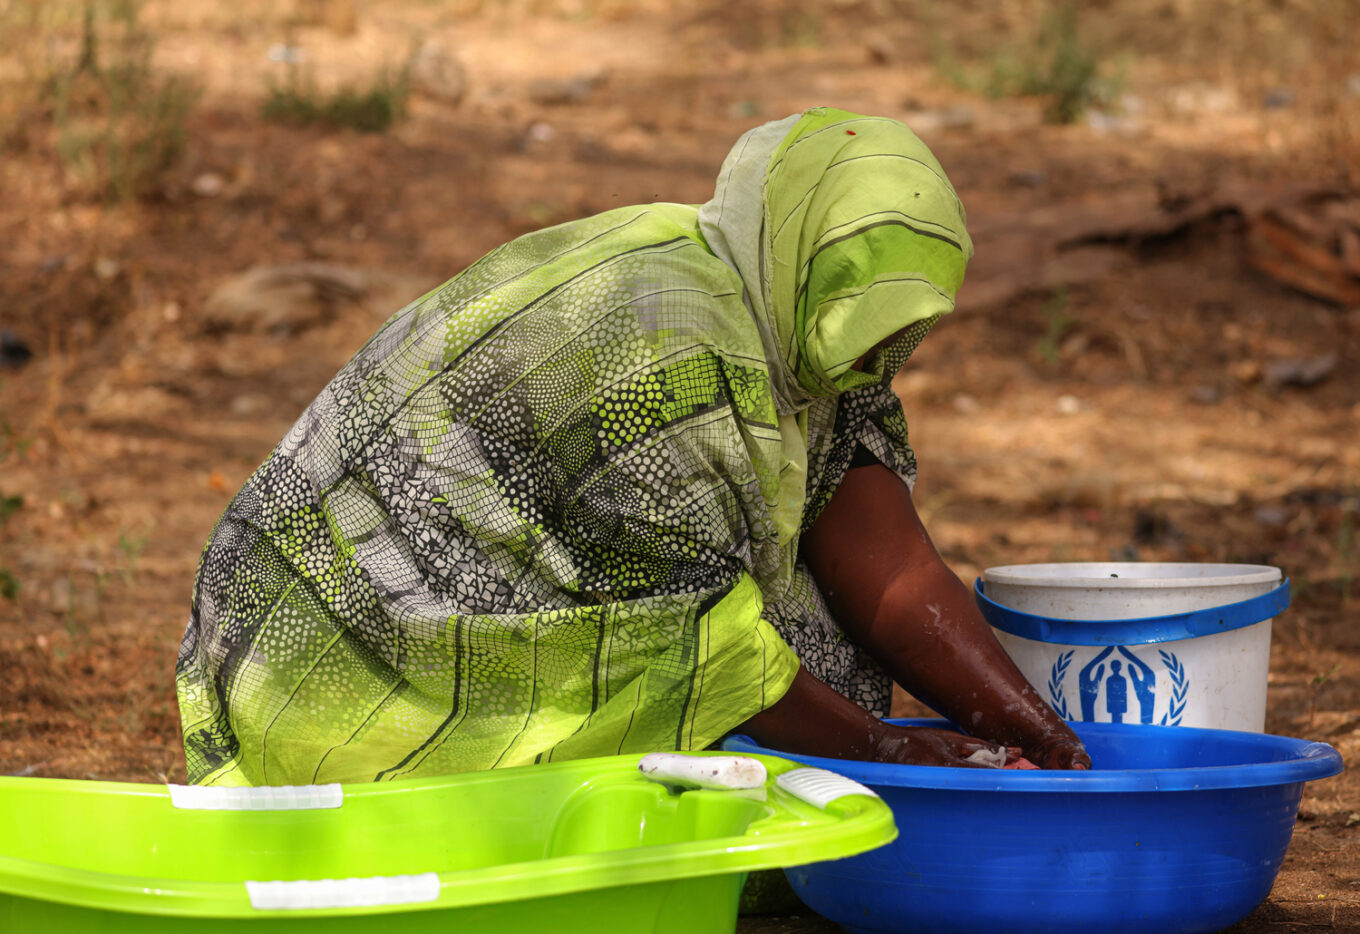 A woman kneels down with her hands in a bucket